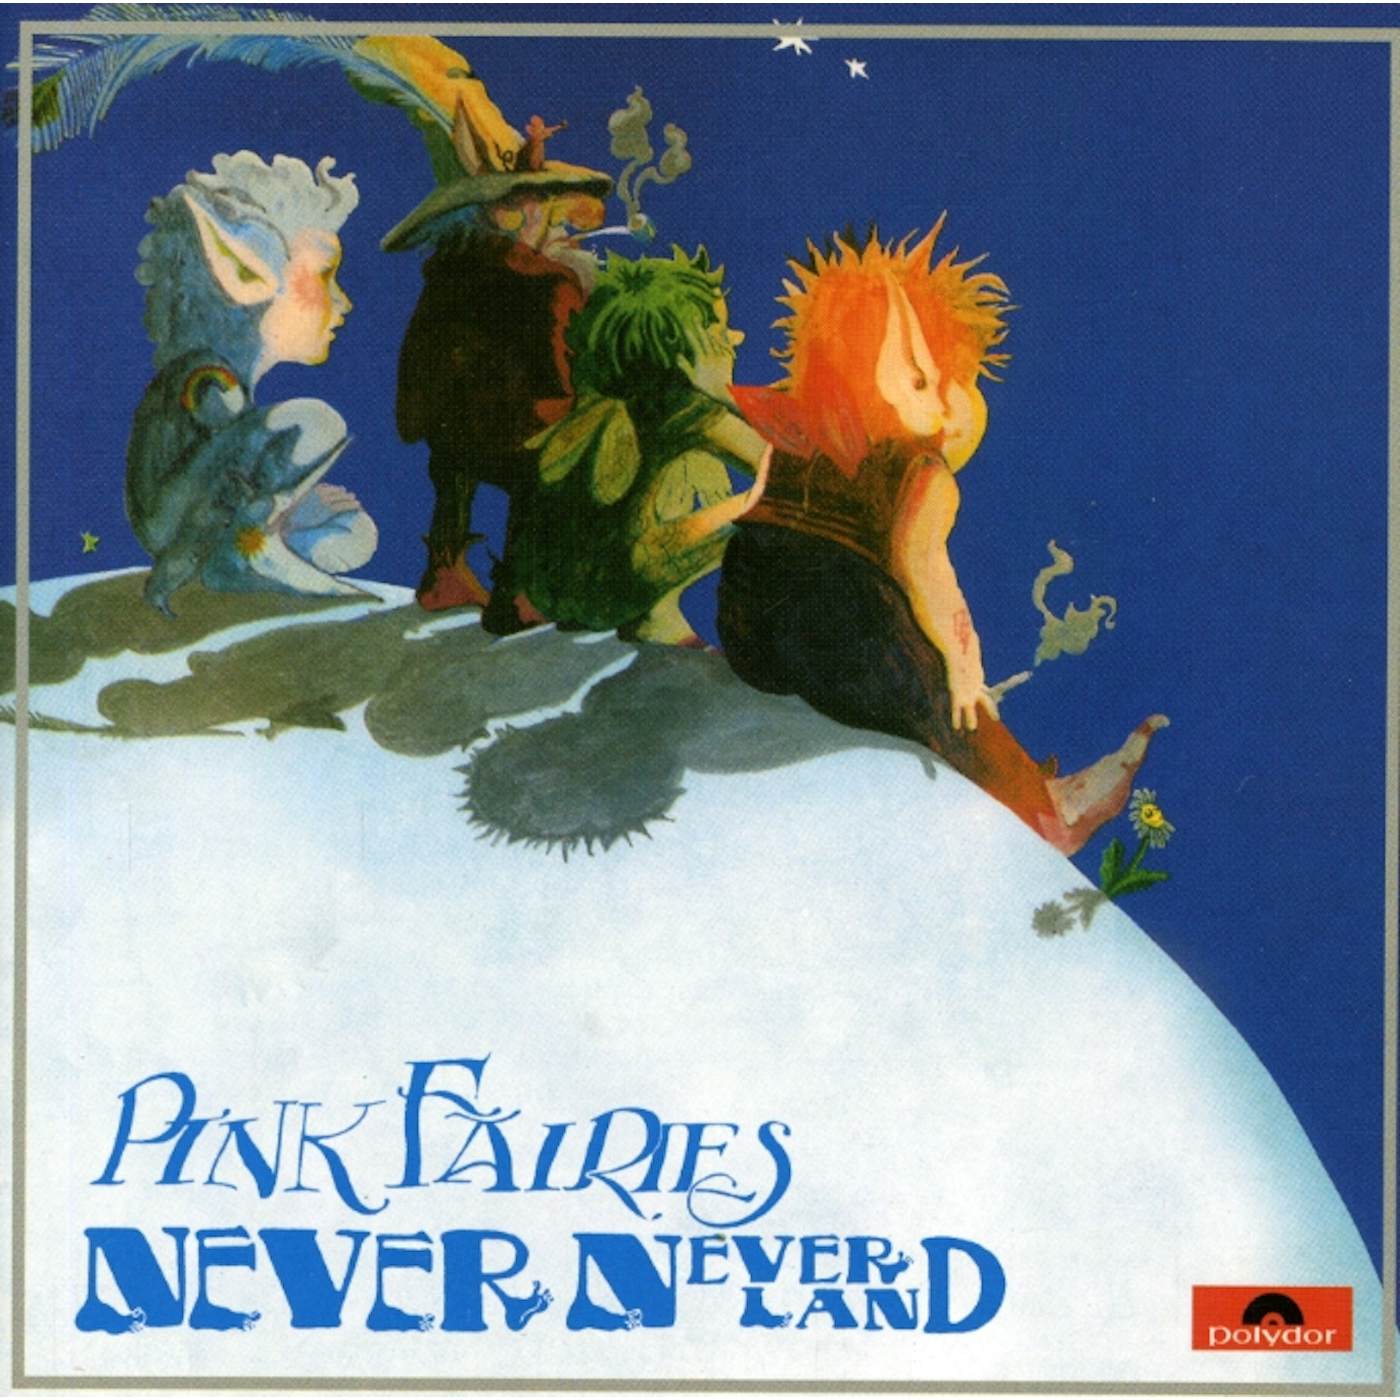 The Pink Fairies NEVERNEVERLAND CD